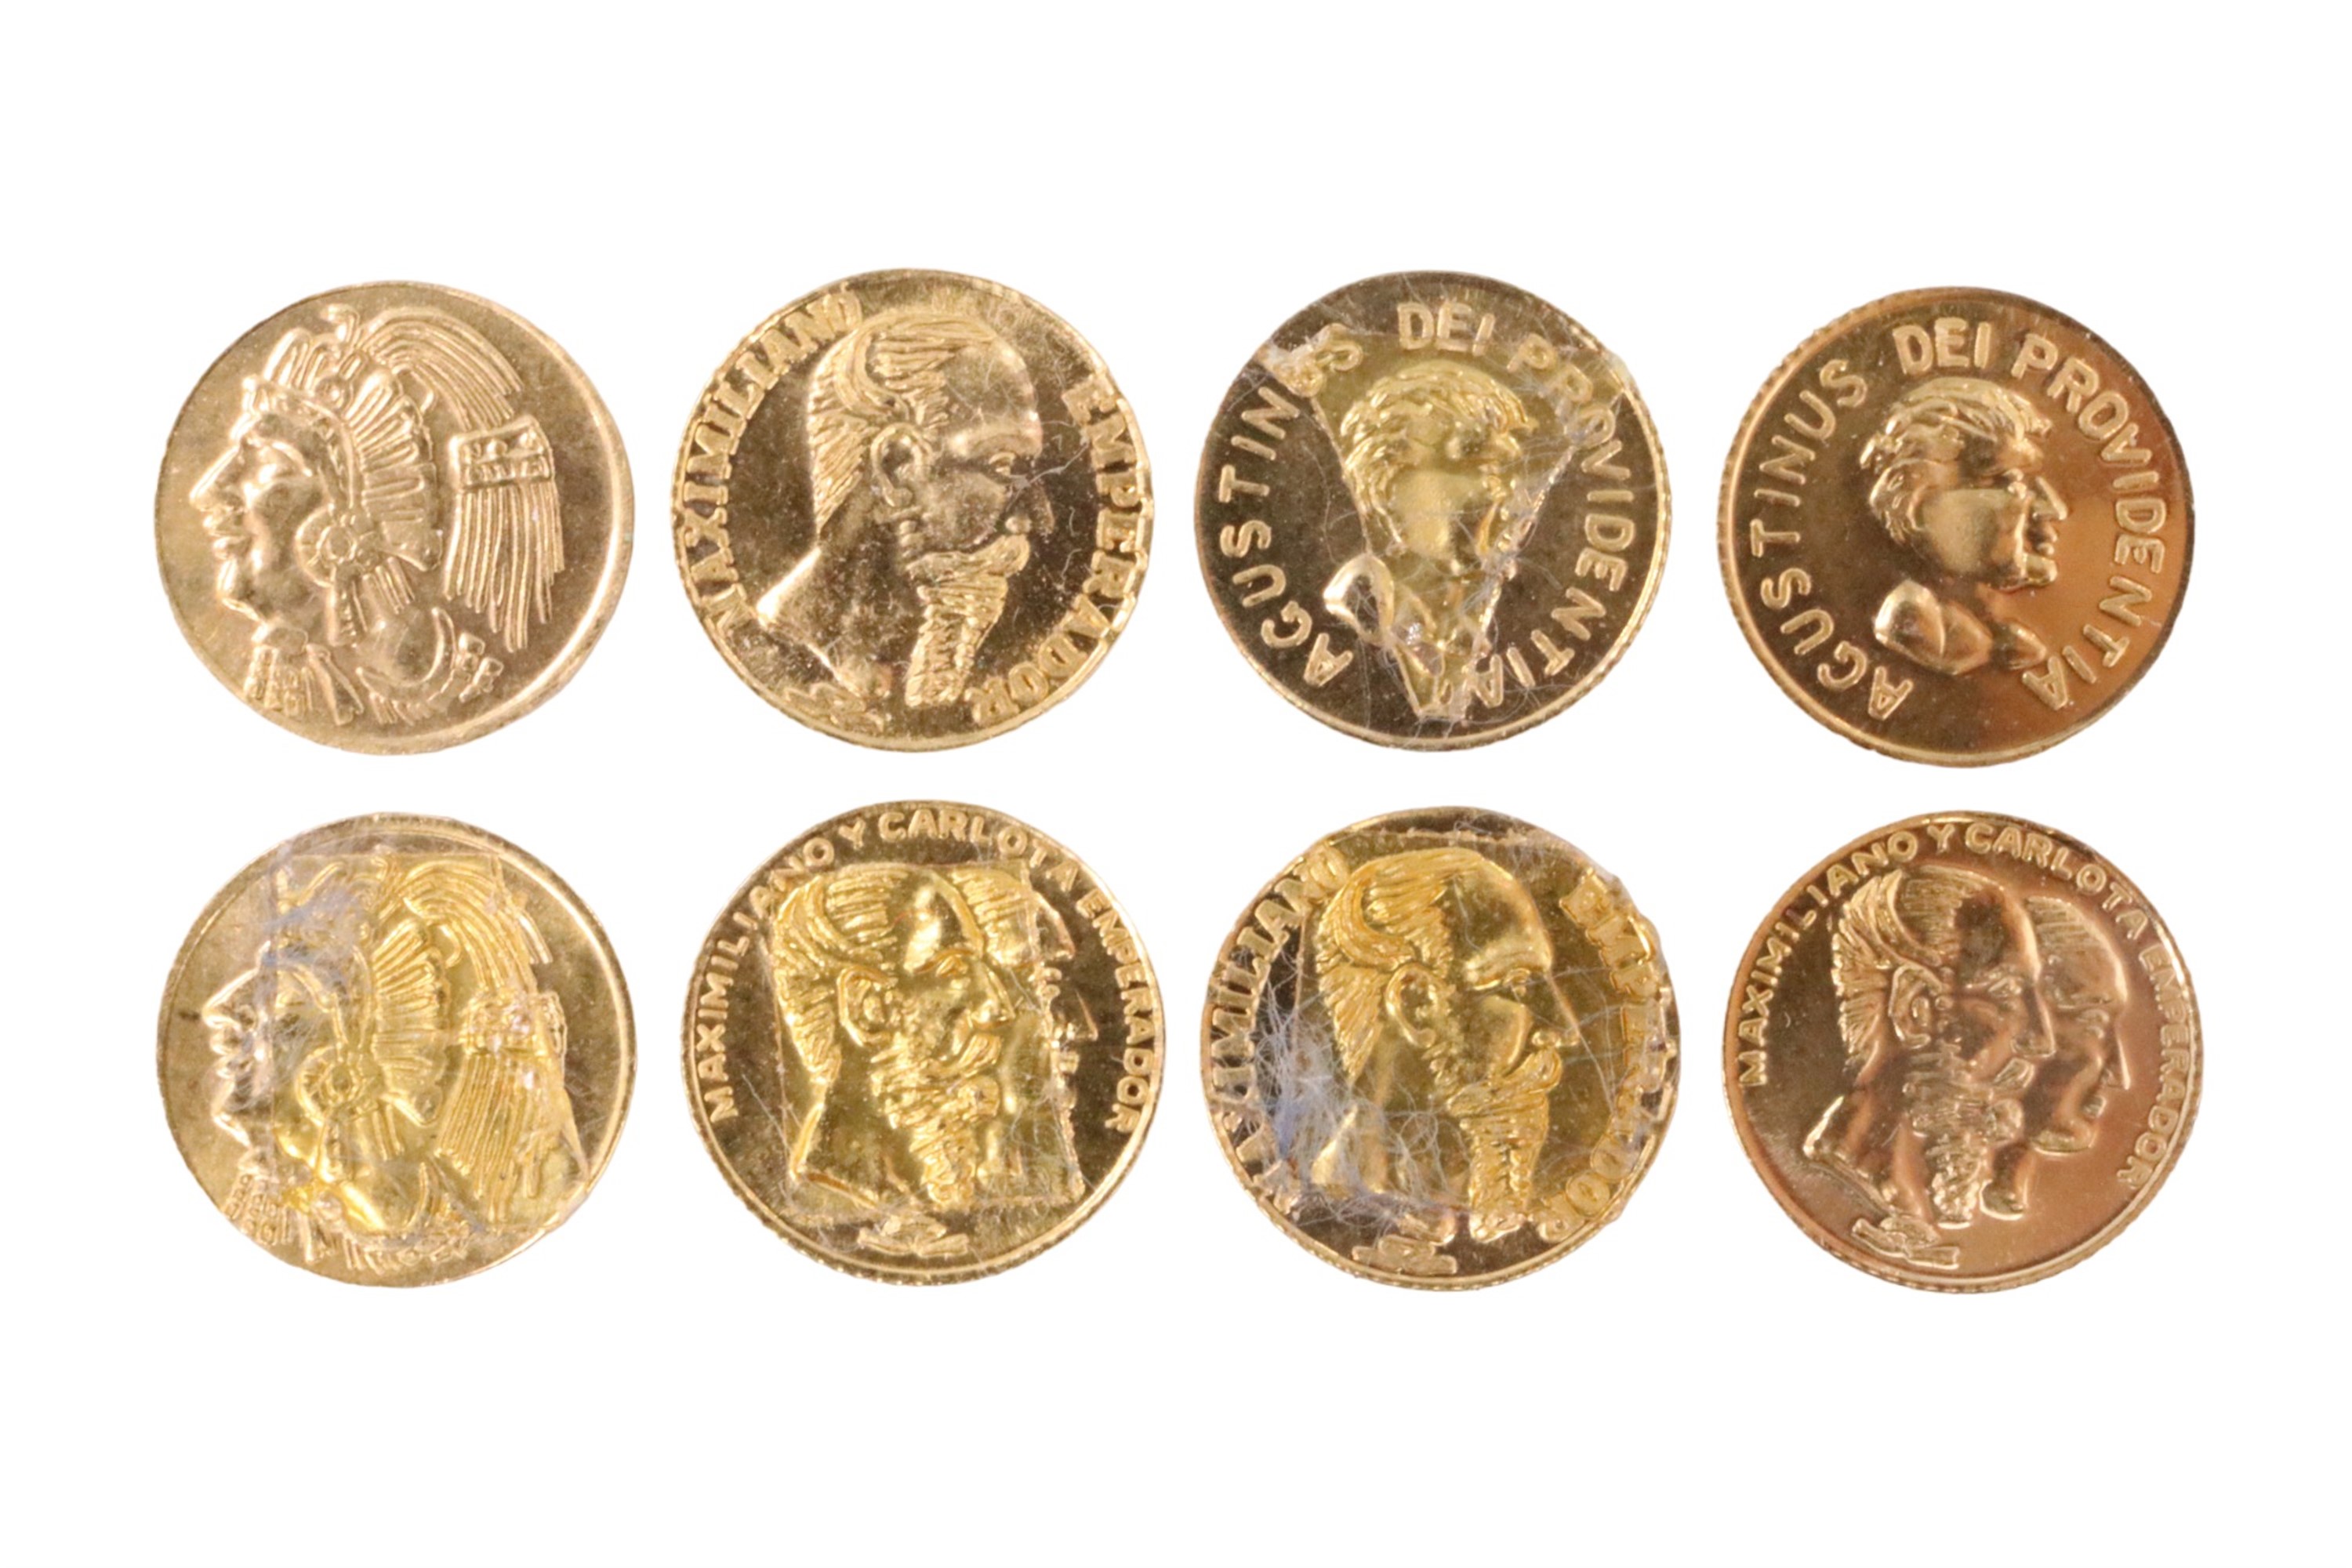 Eight miniature yellow-metal reproduction 19th Century Mexican coins, tests as high carat gold, 3.15